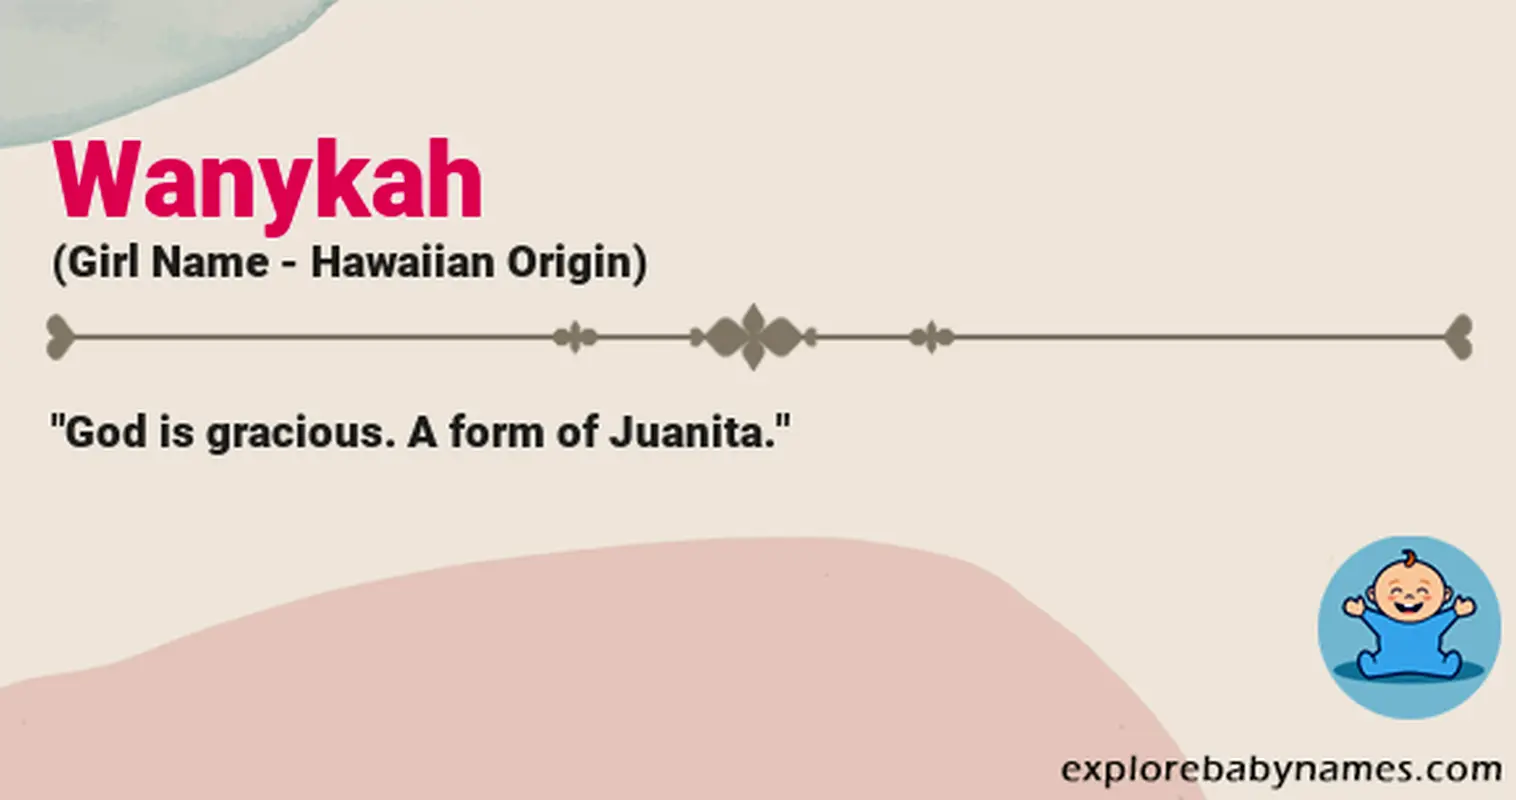 Meaning of Wanykah